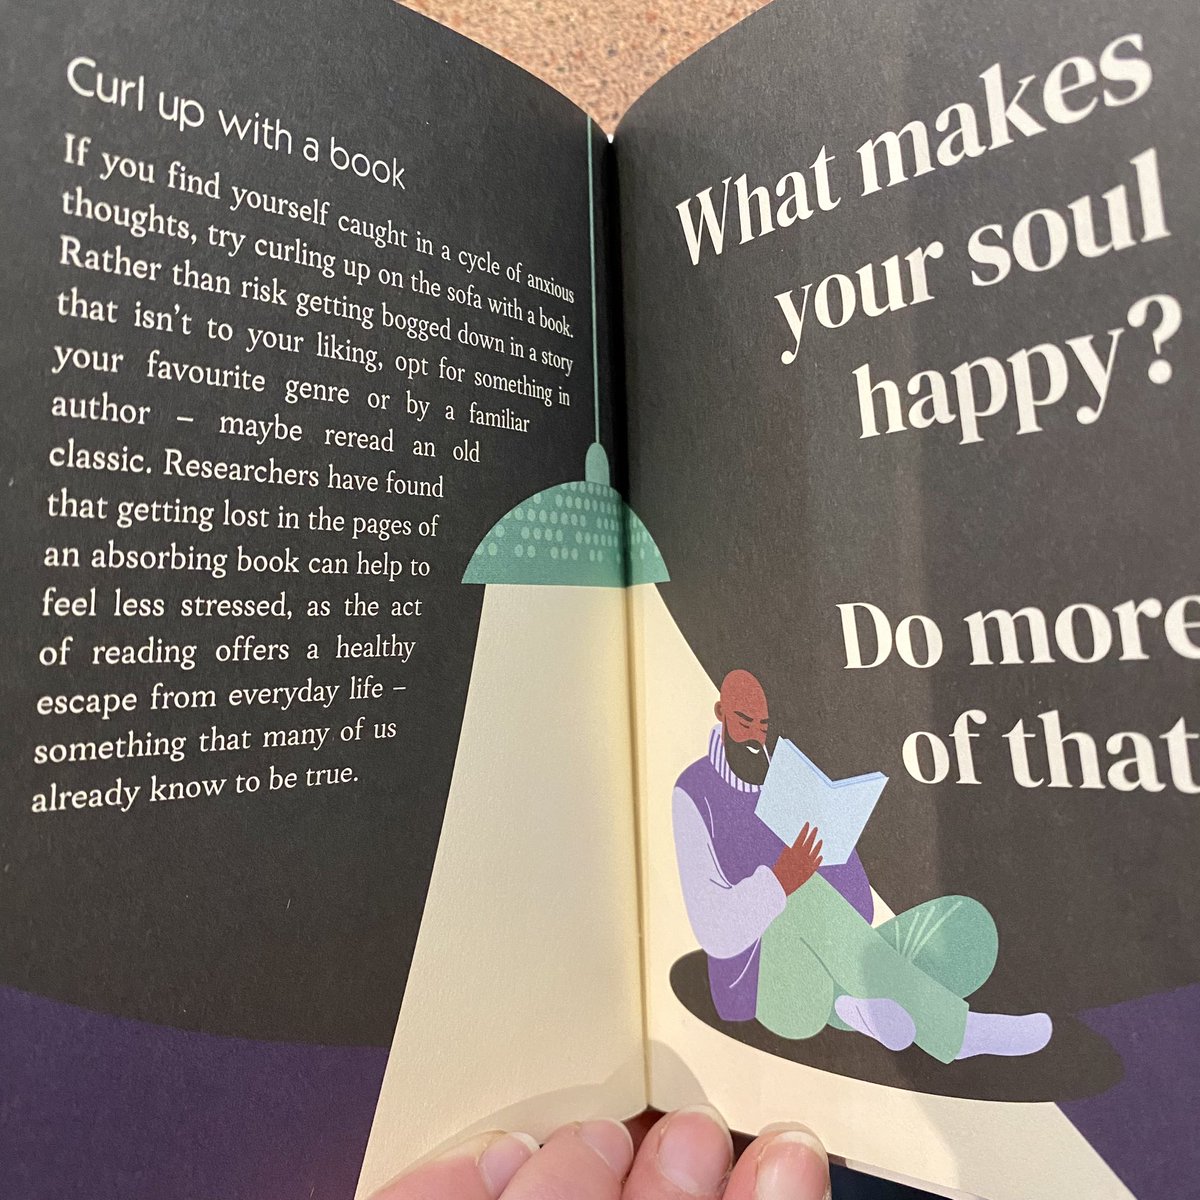 This is our favourite wellbeing book at the moment ❤️ It’s full of gentle hints and happy reminders, even the title ‘UnAnxious’ makes us feel happy 😊 Pop into Browser or visit us online for your copy 📖 #ShopIndie #ChooseBookshops #ChooseBooks